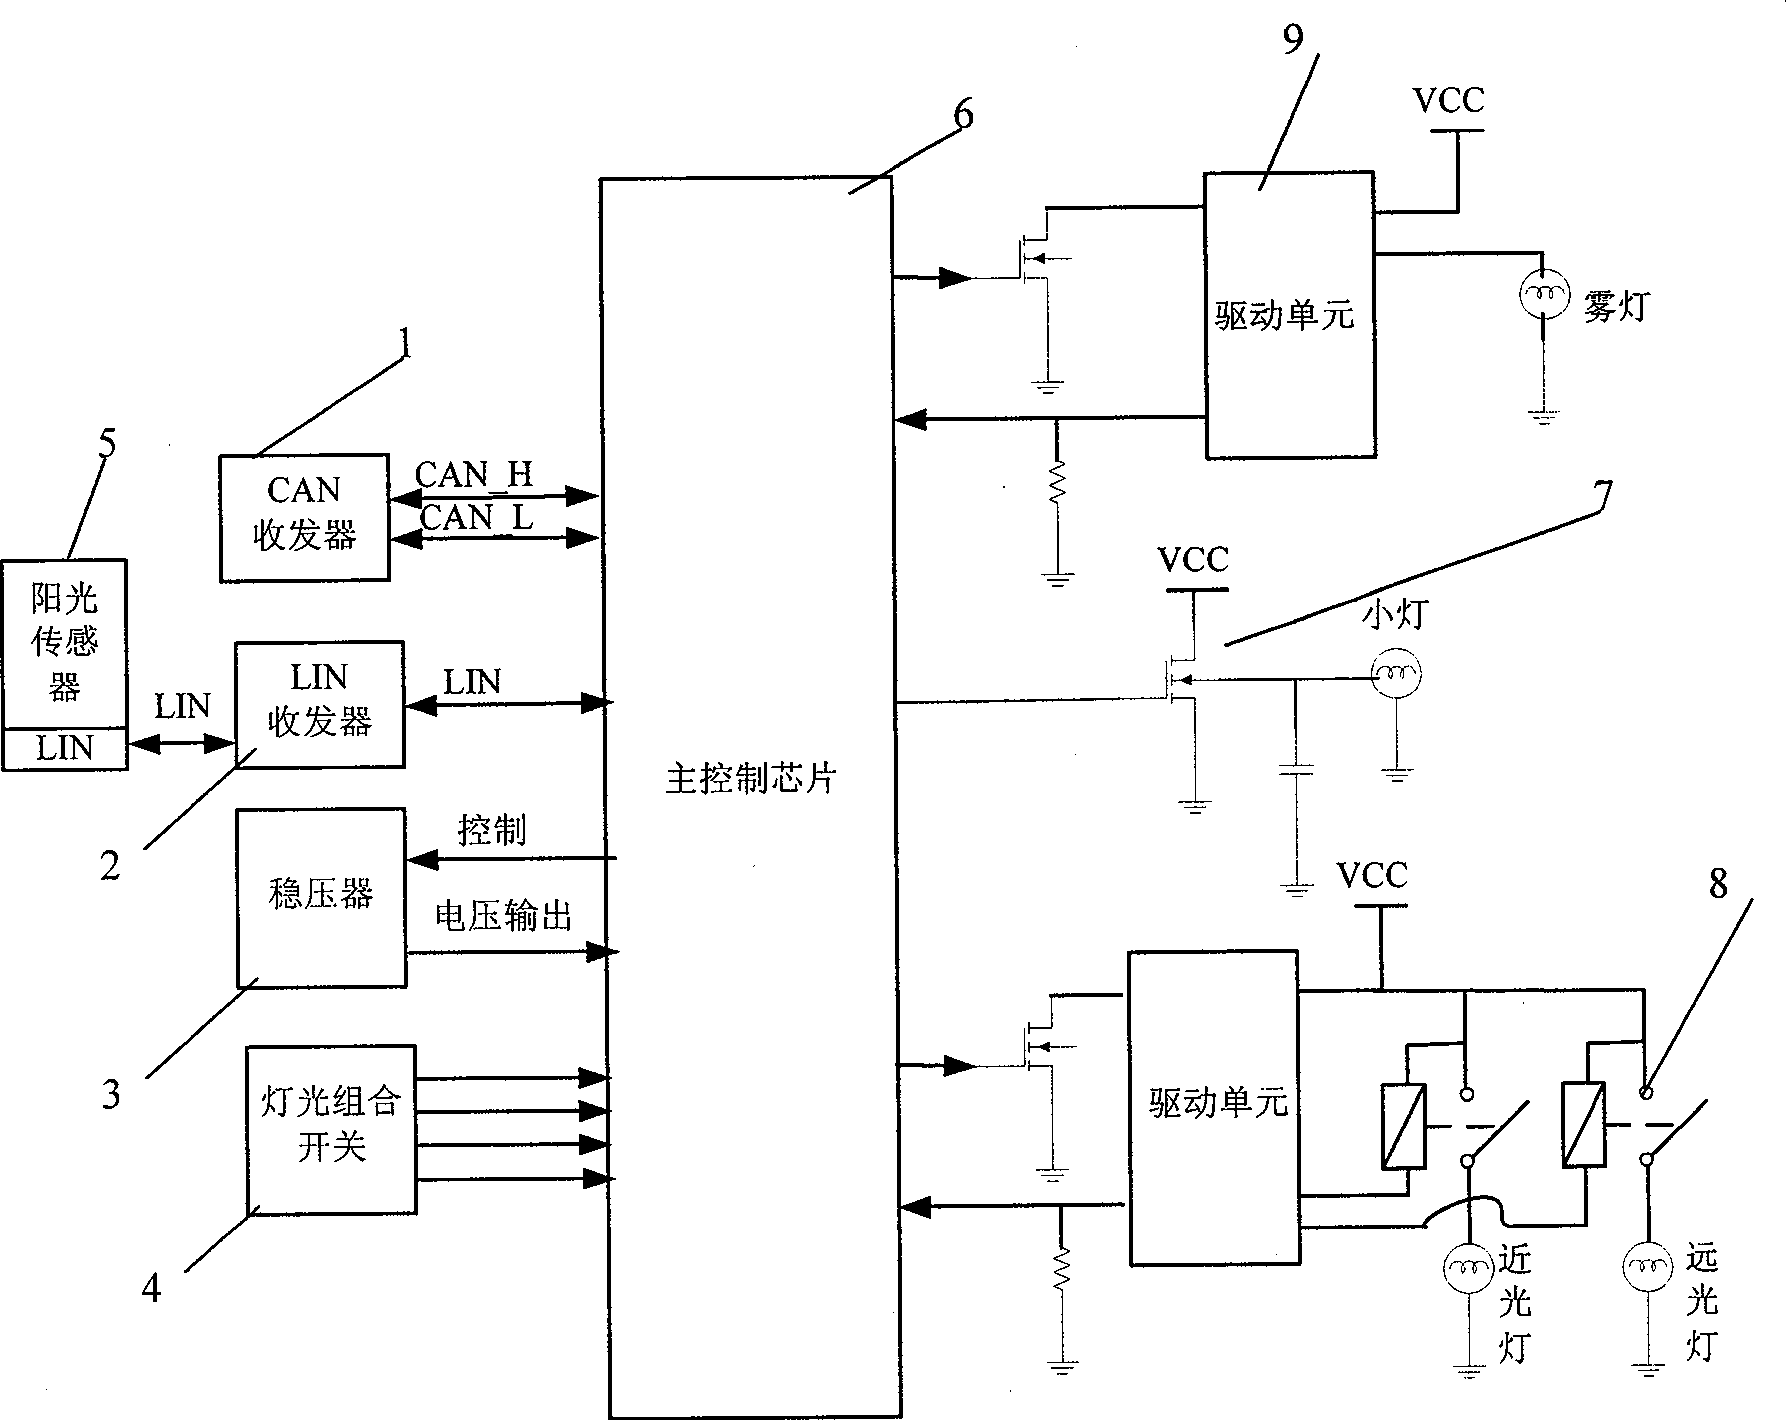 Vehicle external lamp controller based on CAN and LIN bus